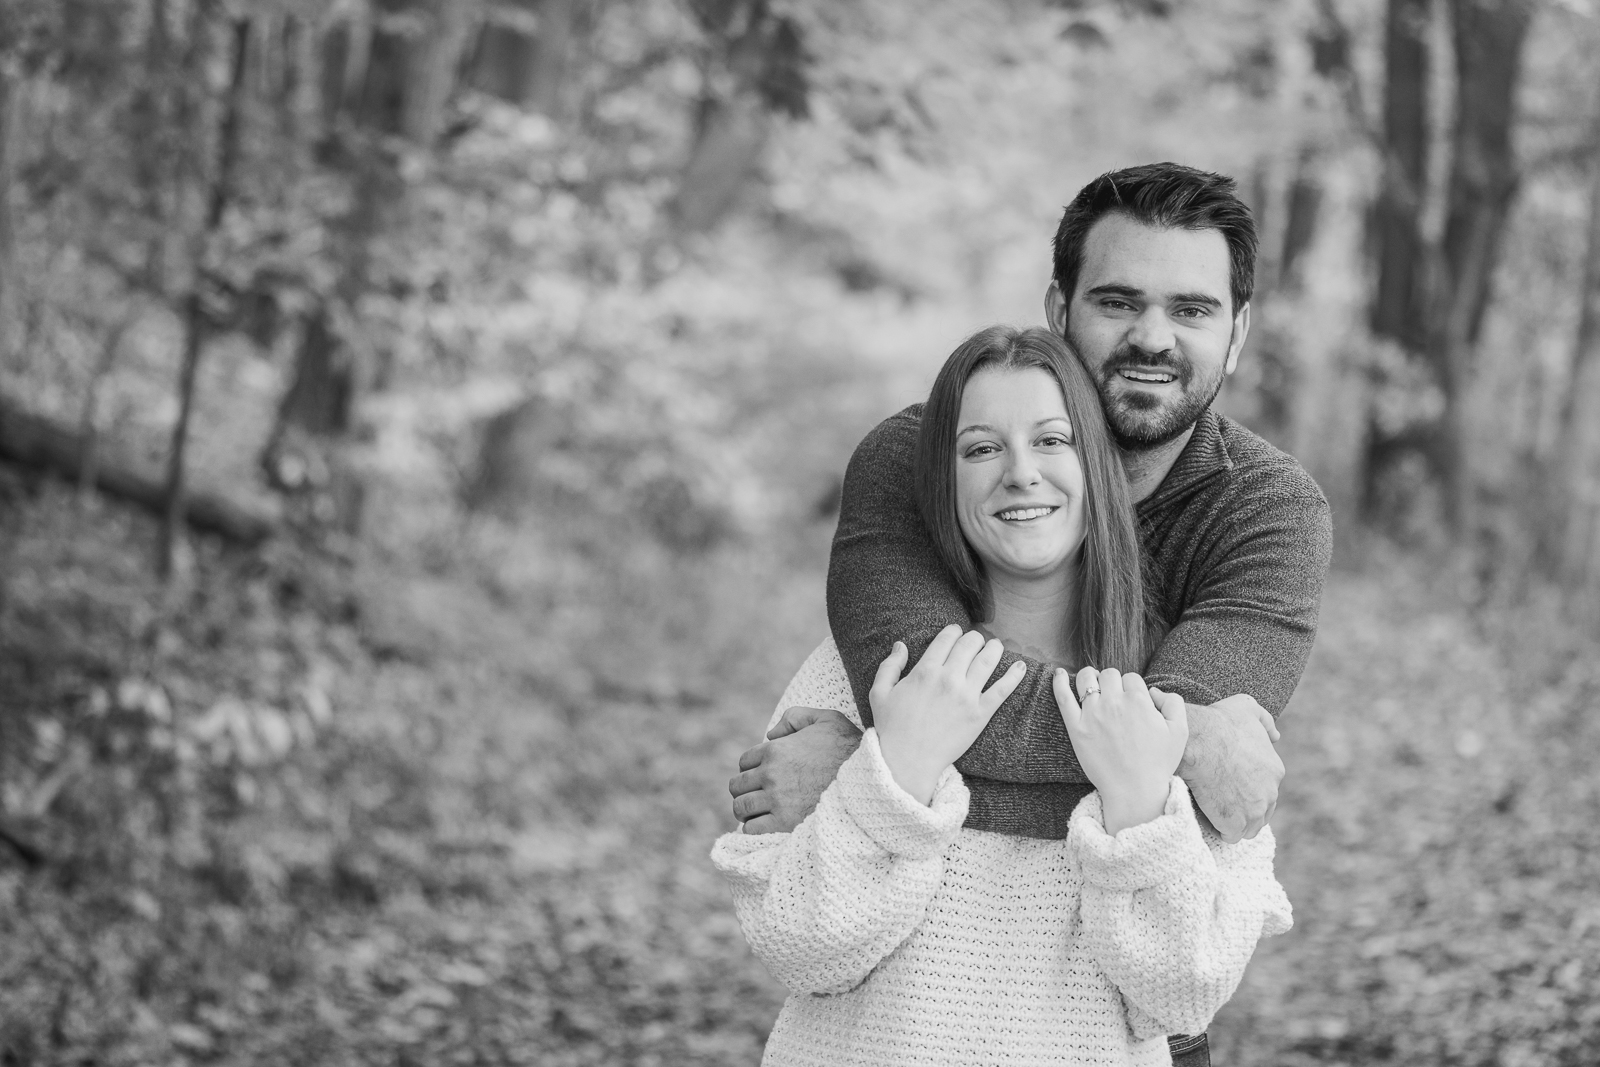 Man and woman fiancee engagement photo, couple portrait, nature, fall leaves, cute, smile, outdoor fall engagement photo session at Tinkers Creek, Bedford Reservation, Cleveland Metroparks